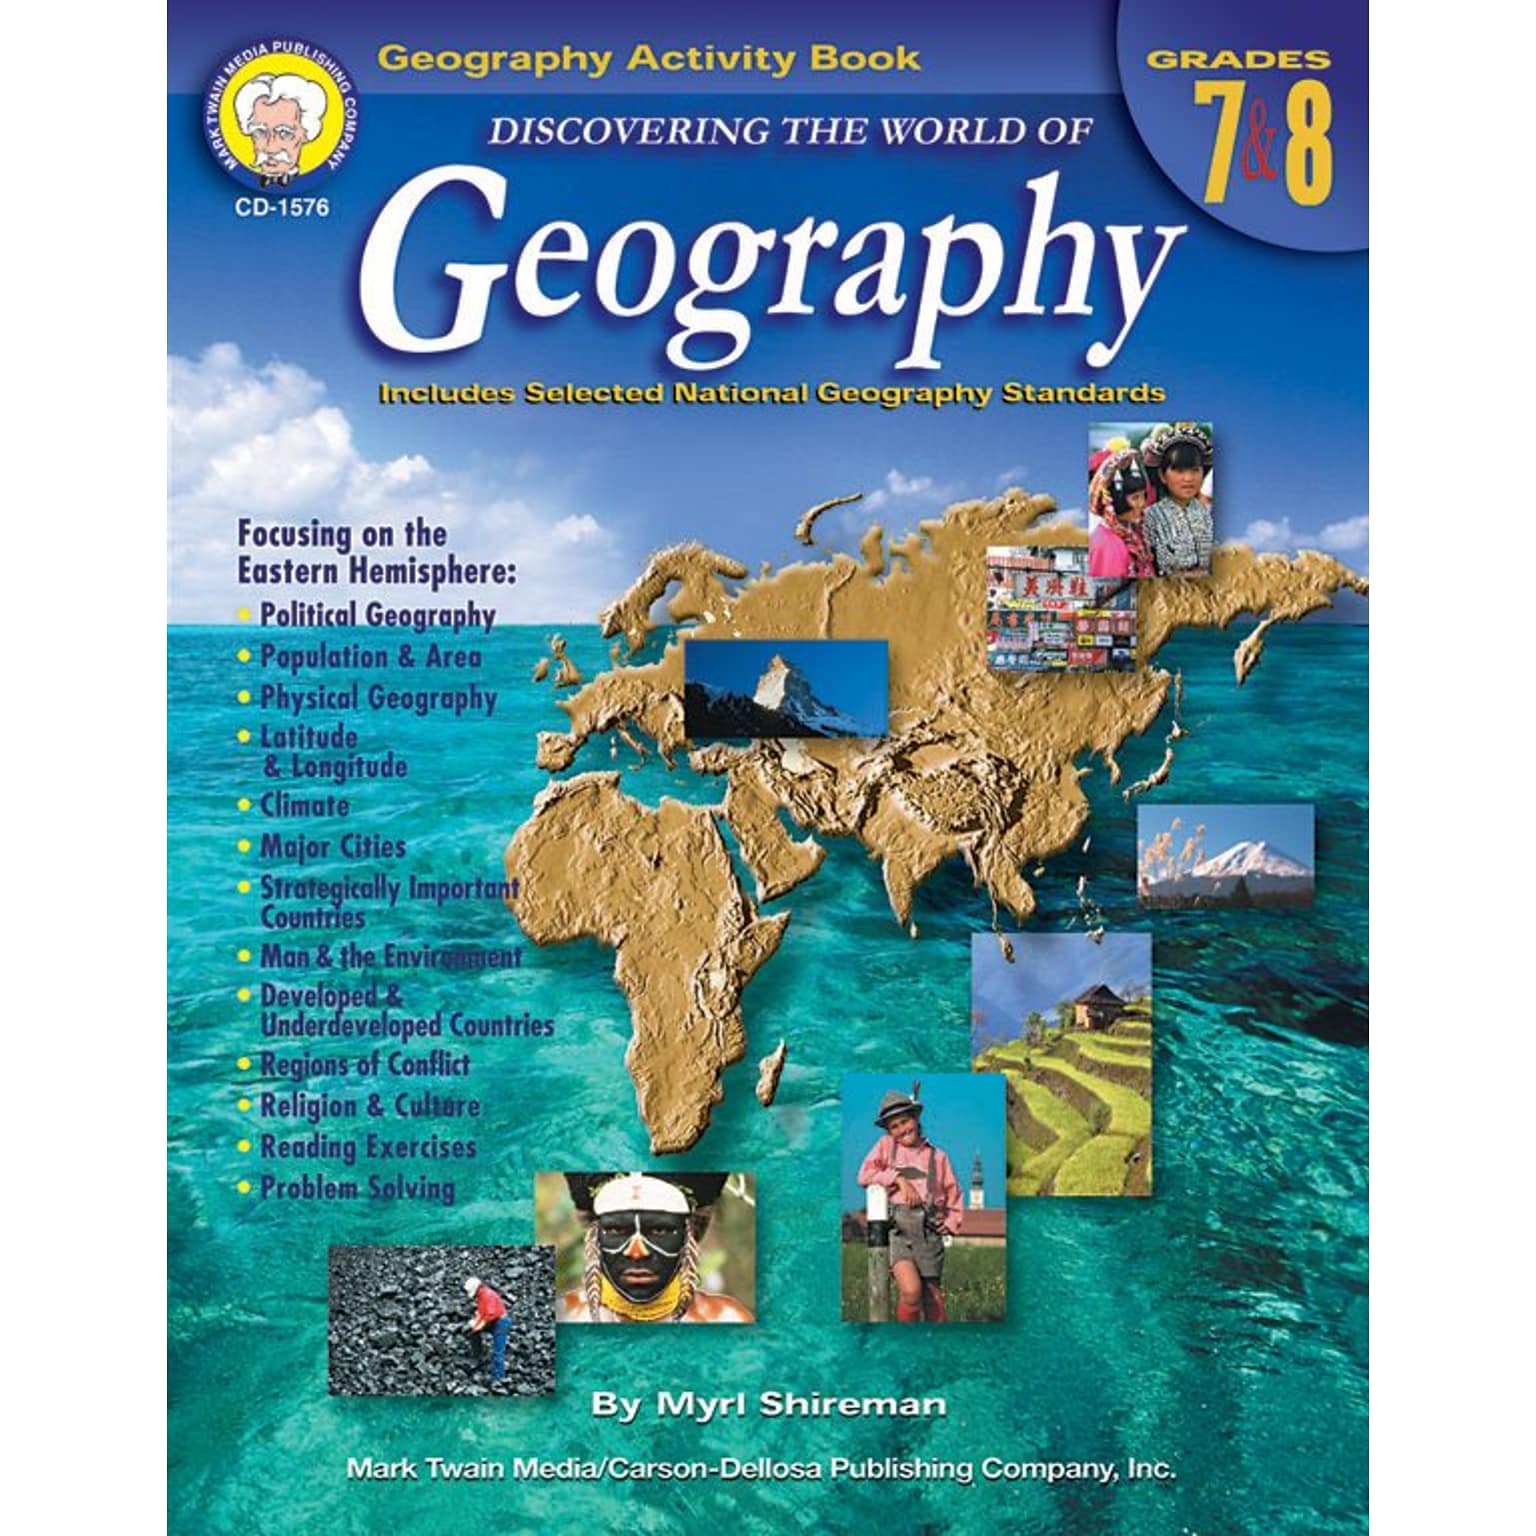 Discovering the World of Geography Resource Book, Grades 7 - 8